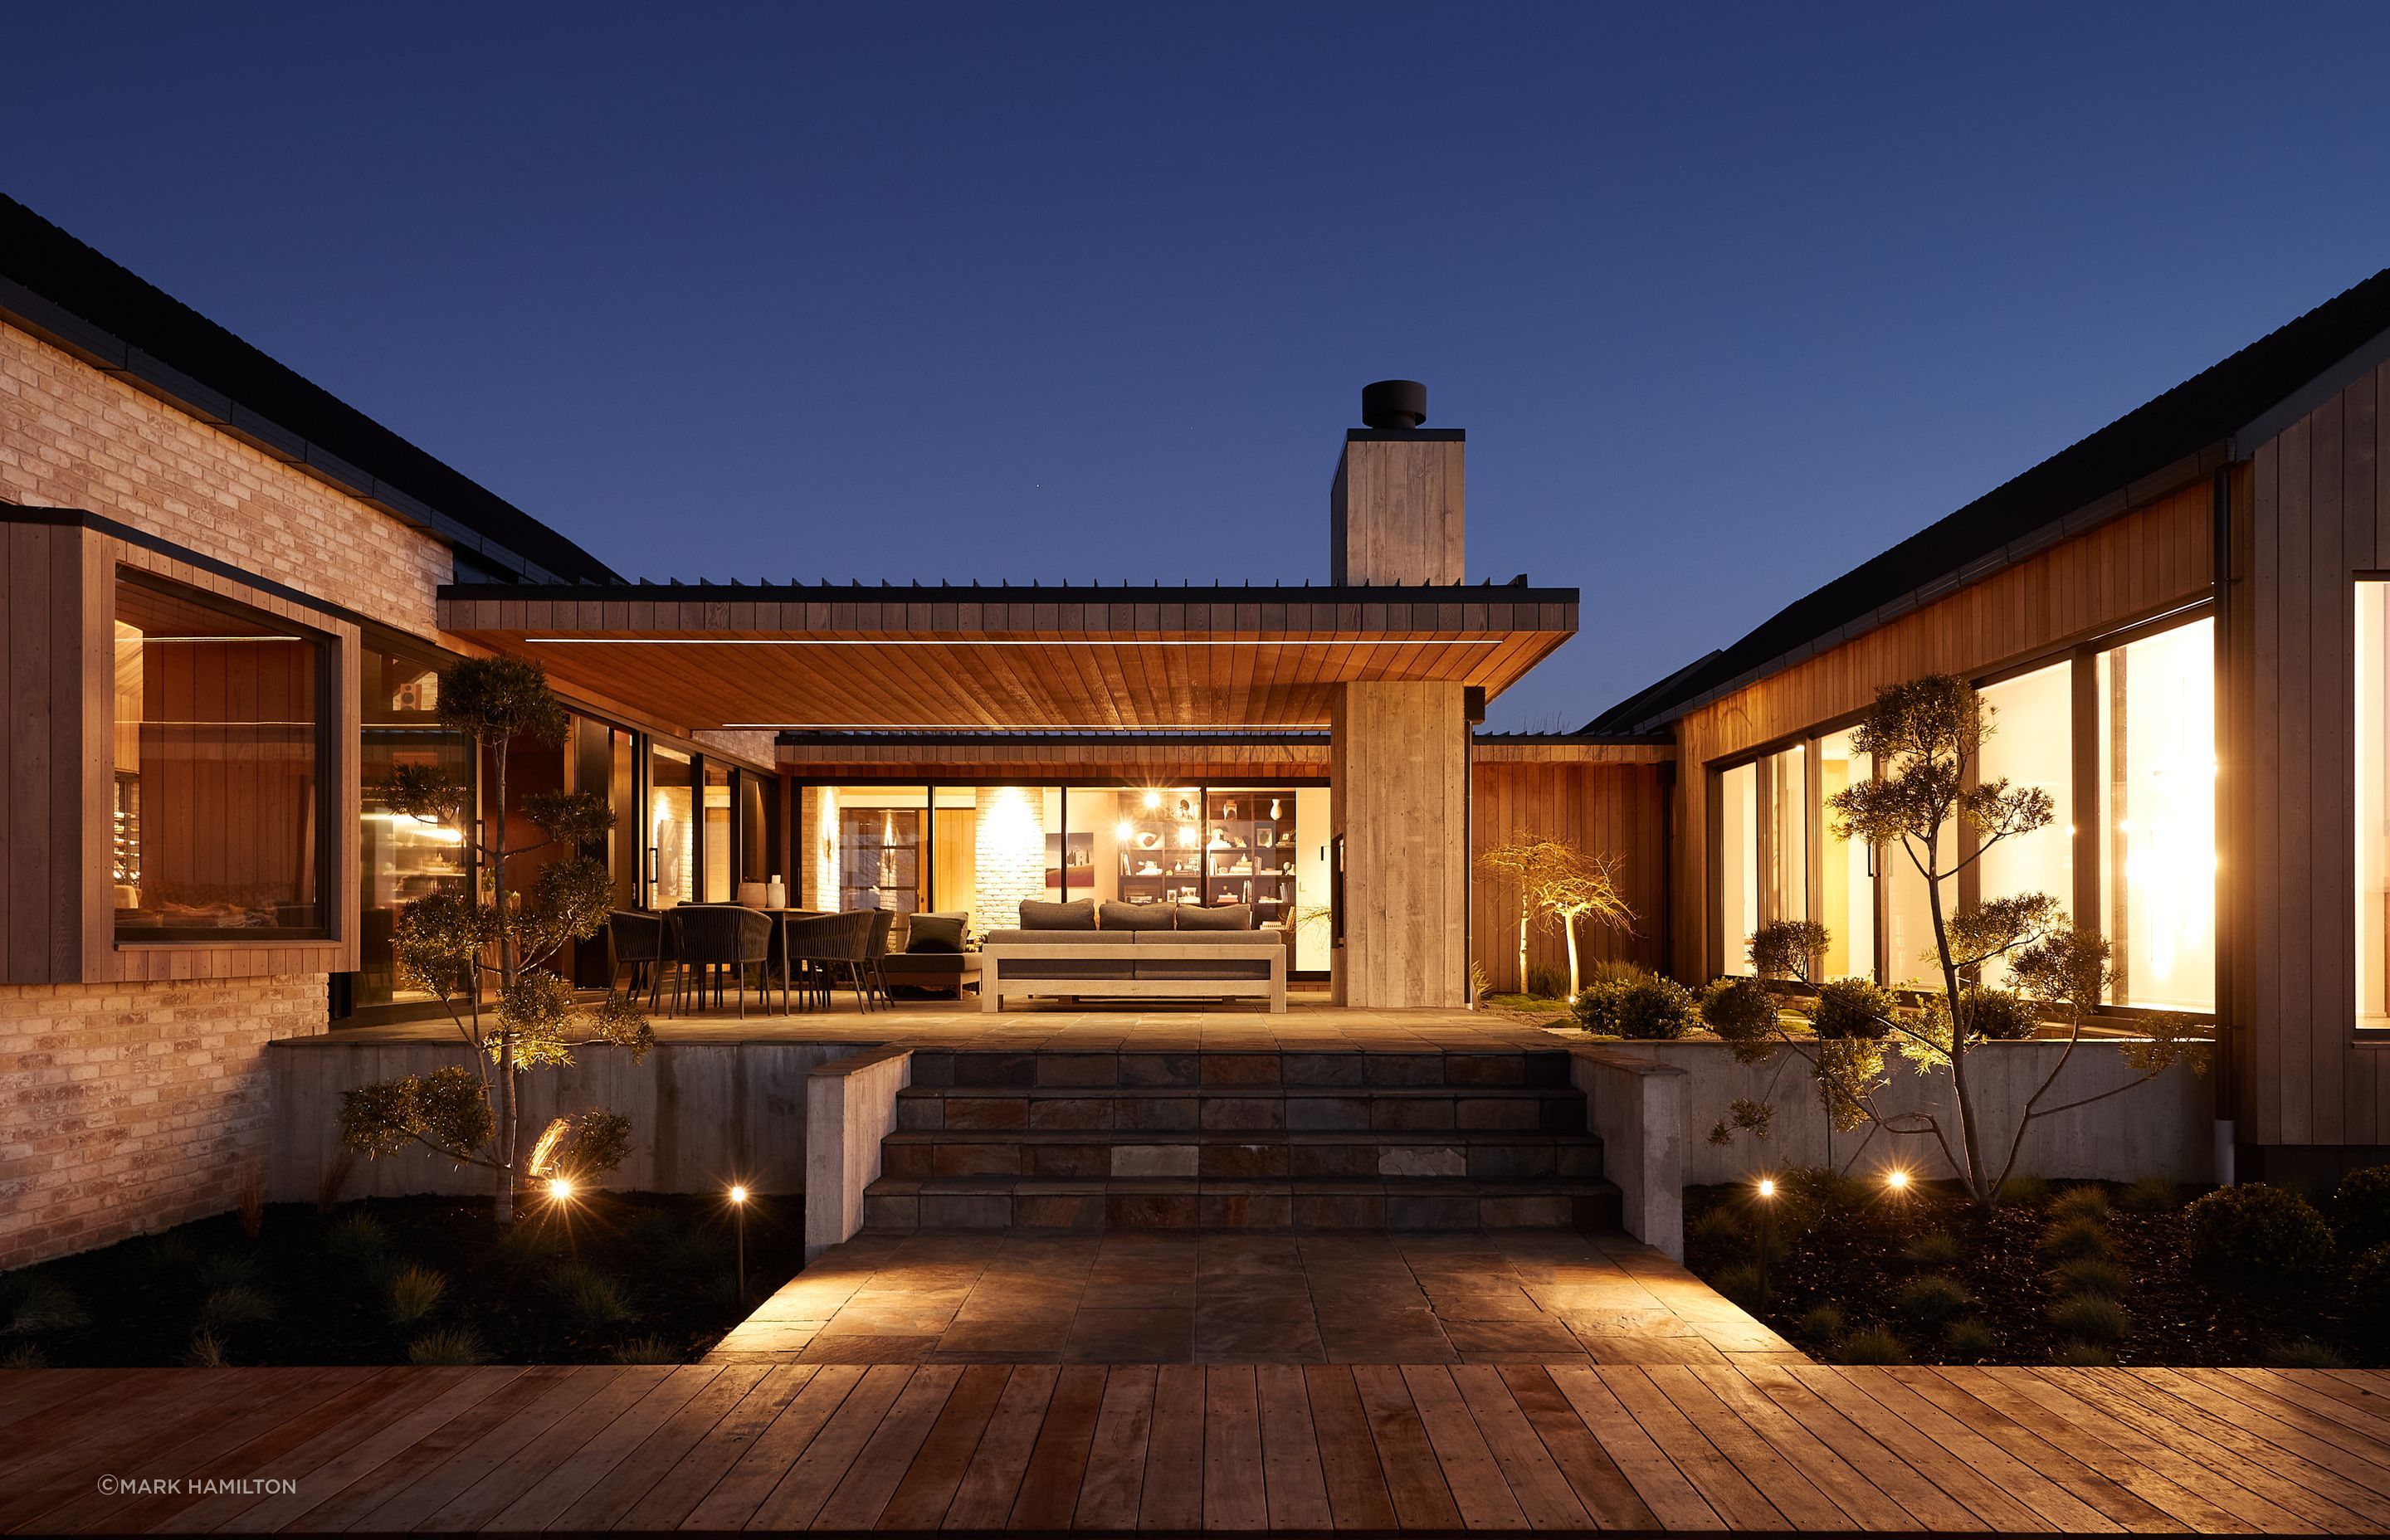 Photo credit: Mark Hamilton. The outdoor internal courtyard with built-in outdoor fireplace features slate paving and Zen garden-like plantings.